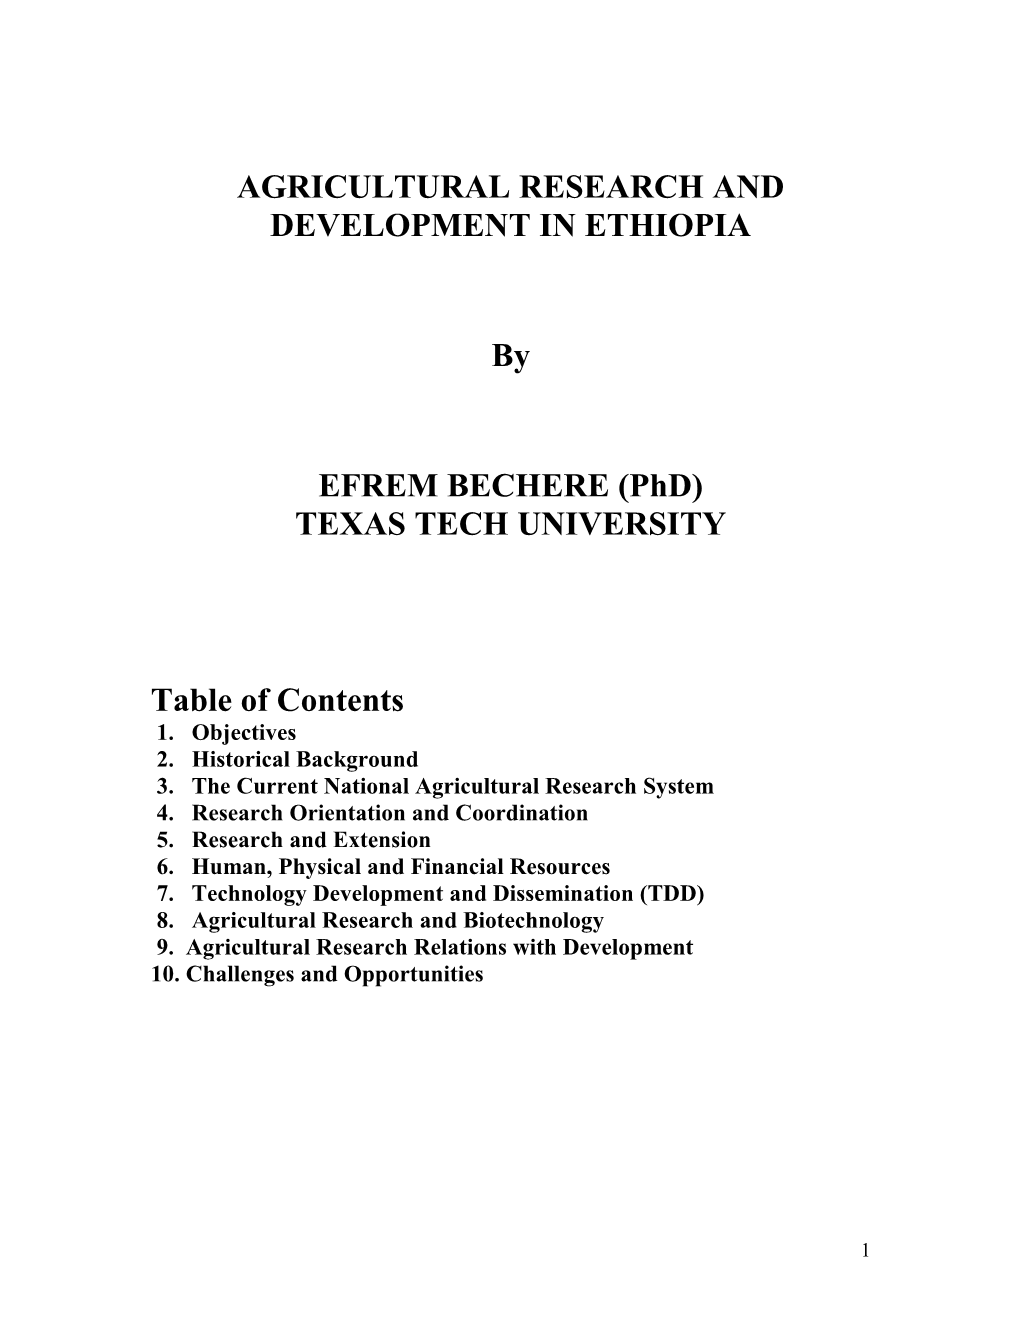 Agricultural Research and Development in Ethiopia